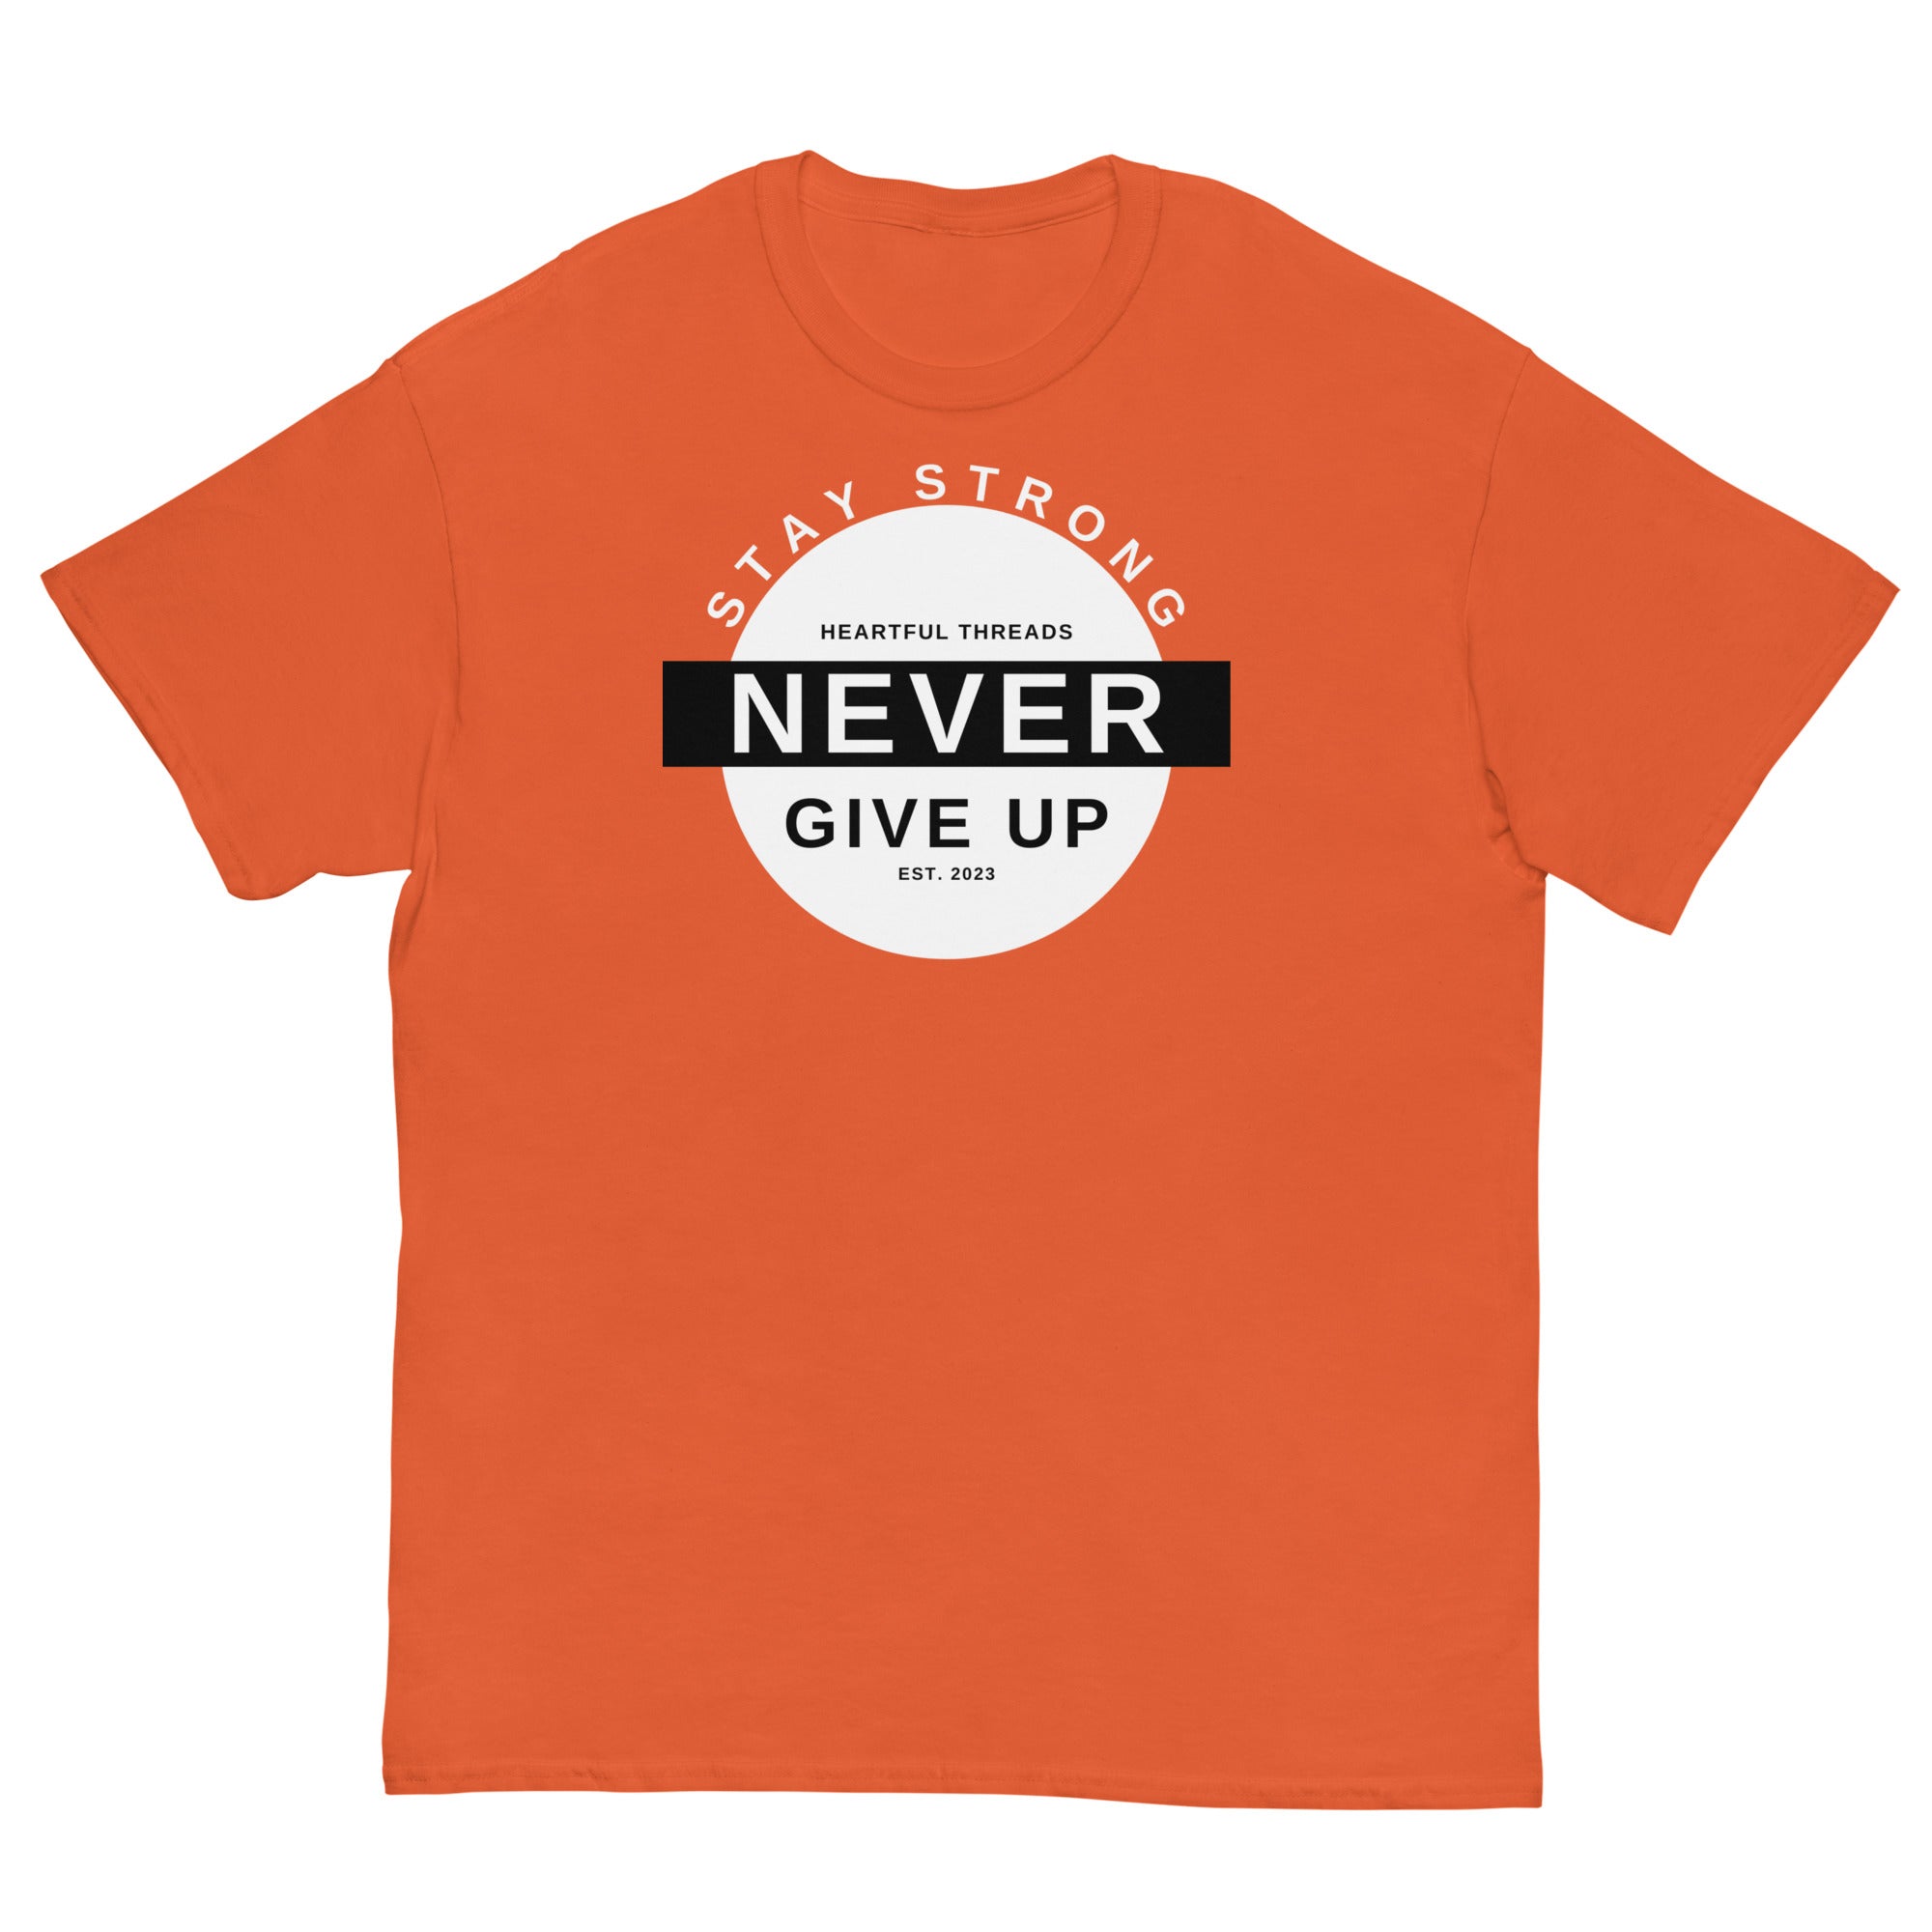 Stay Strong. Never Give Up Men's classic tee